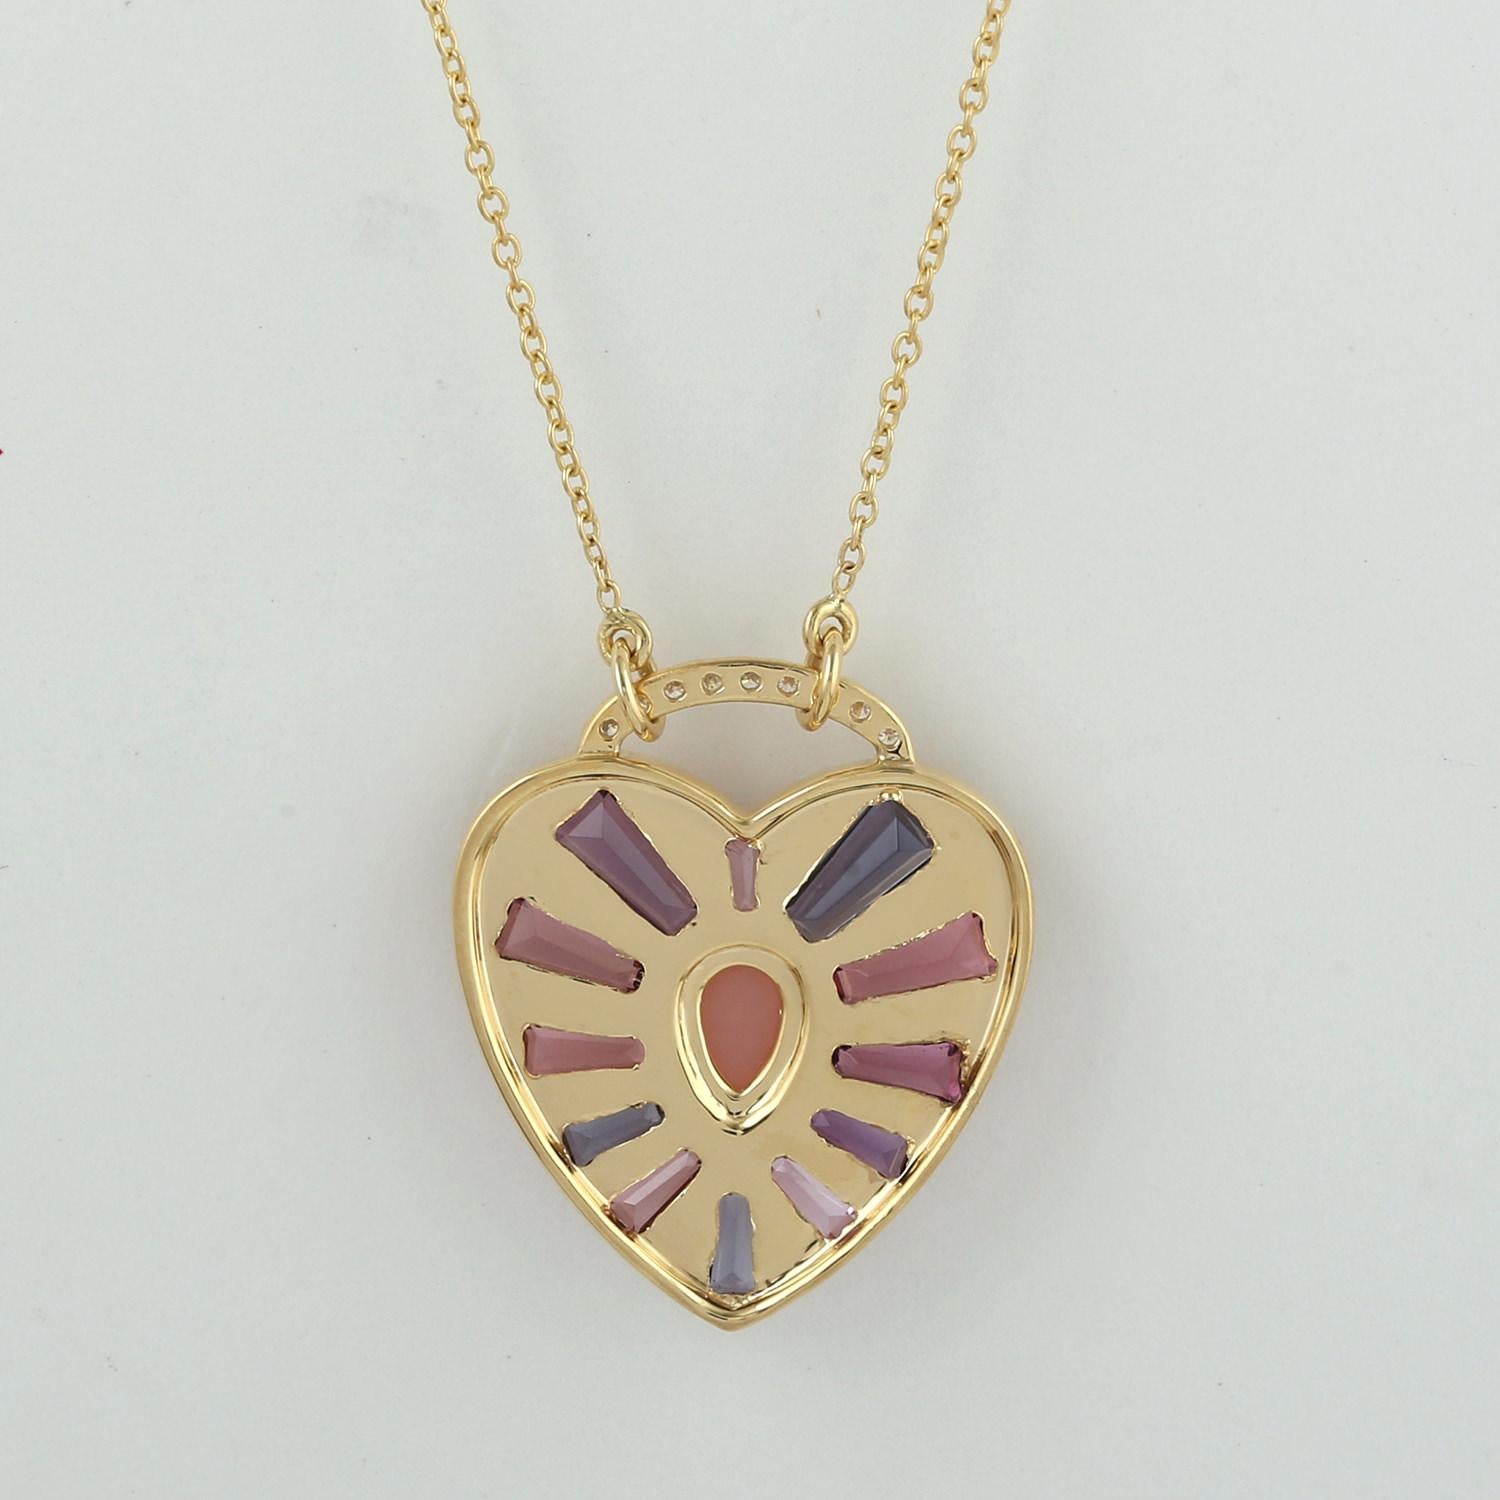 Contemporary Multicolor Baguette Heart Shaped Pendant Chain Necklaces Made In 18k Yellow Gold For Sale